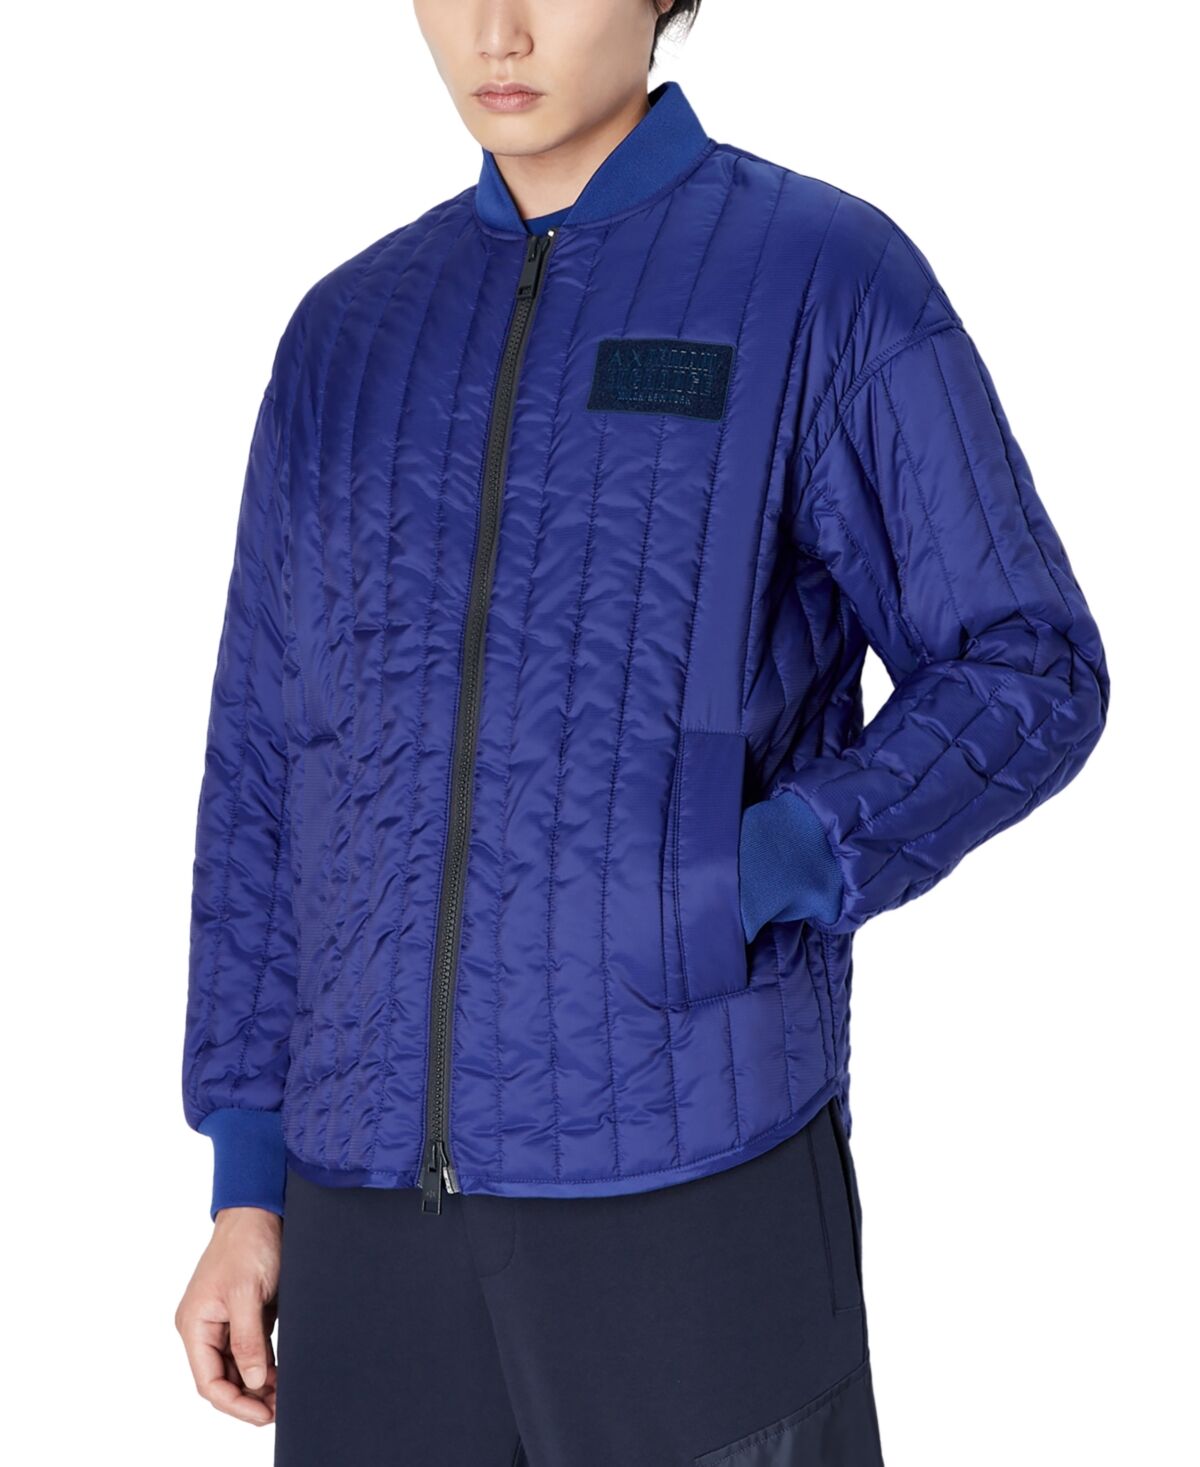 A|x Armani Exchange A X Armani Exchange Men's Quilted Bomber Jacket - New Ultramarine